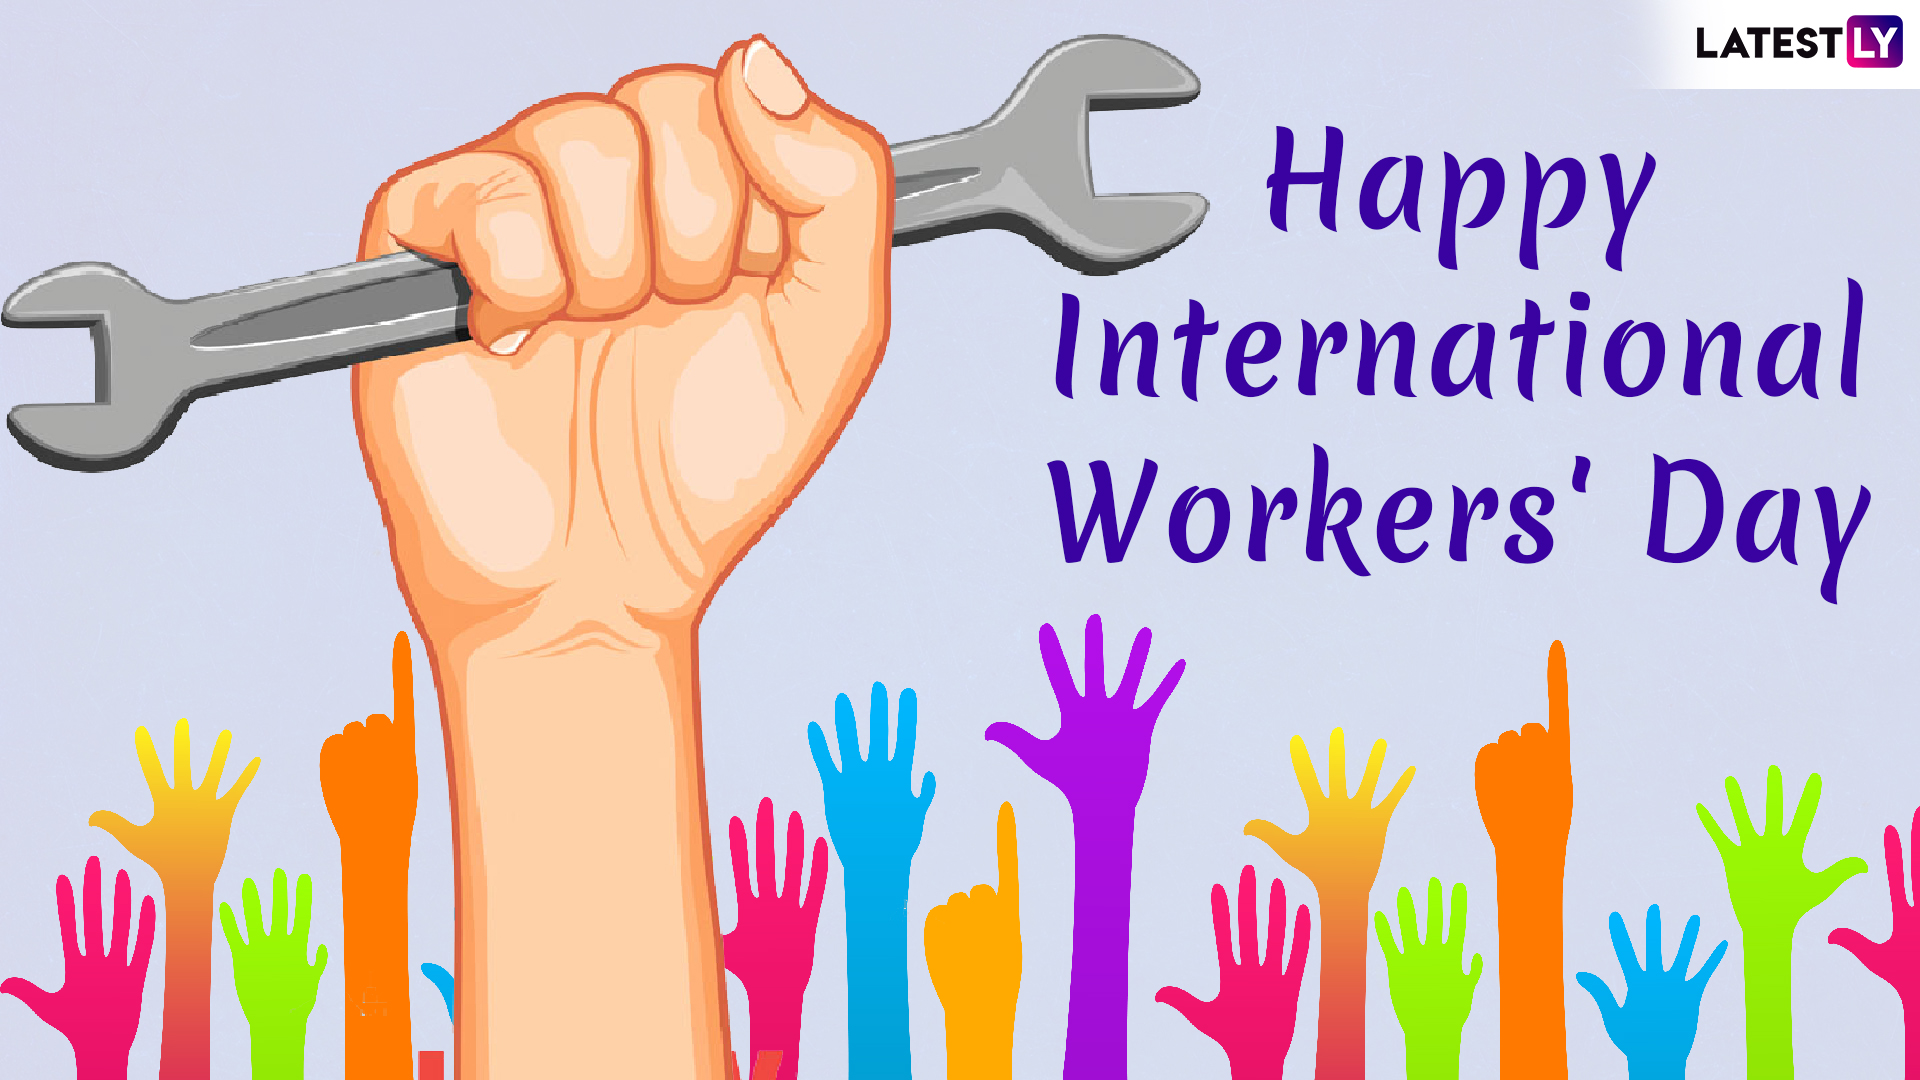 International Labour Day 2019 Hd Images With Quotes For Free Download Online Wish Happy Workers